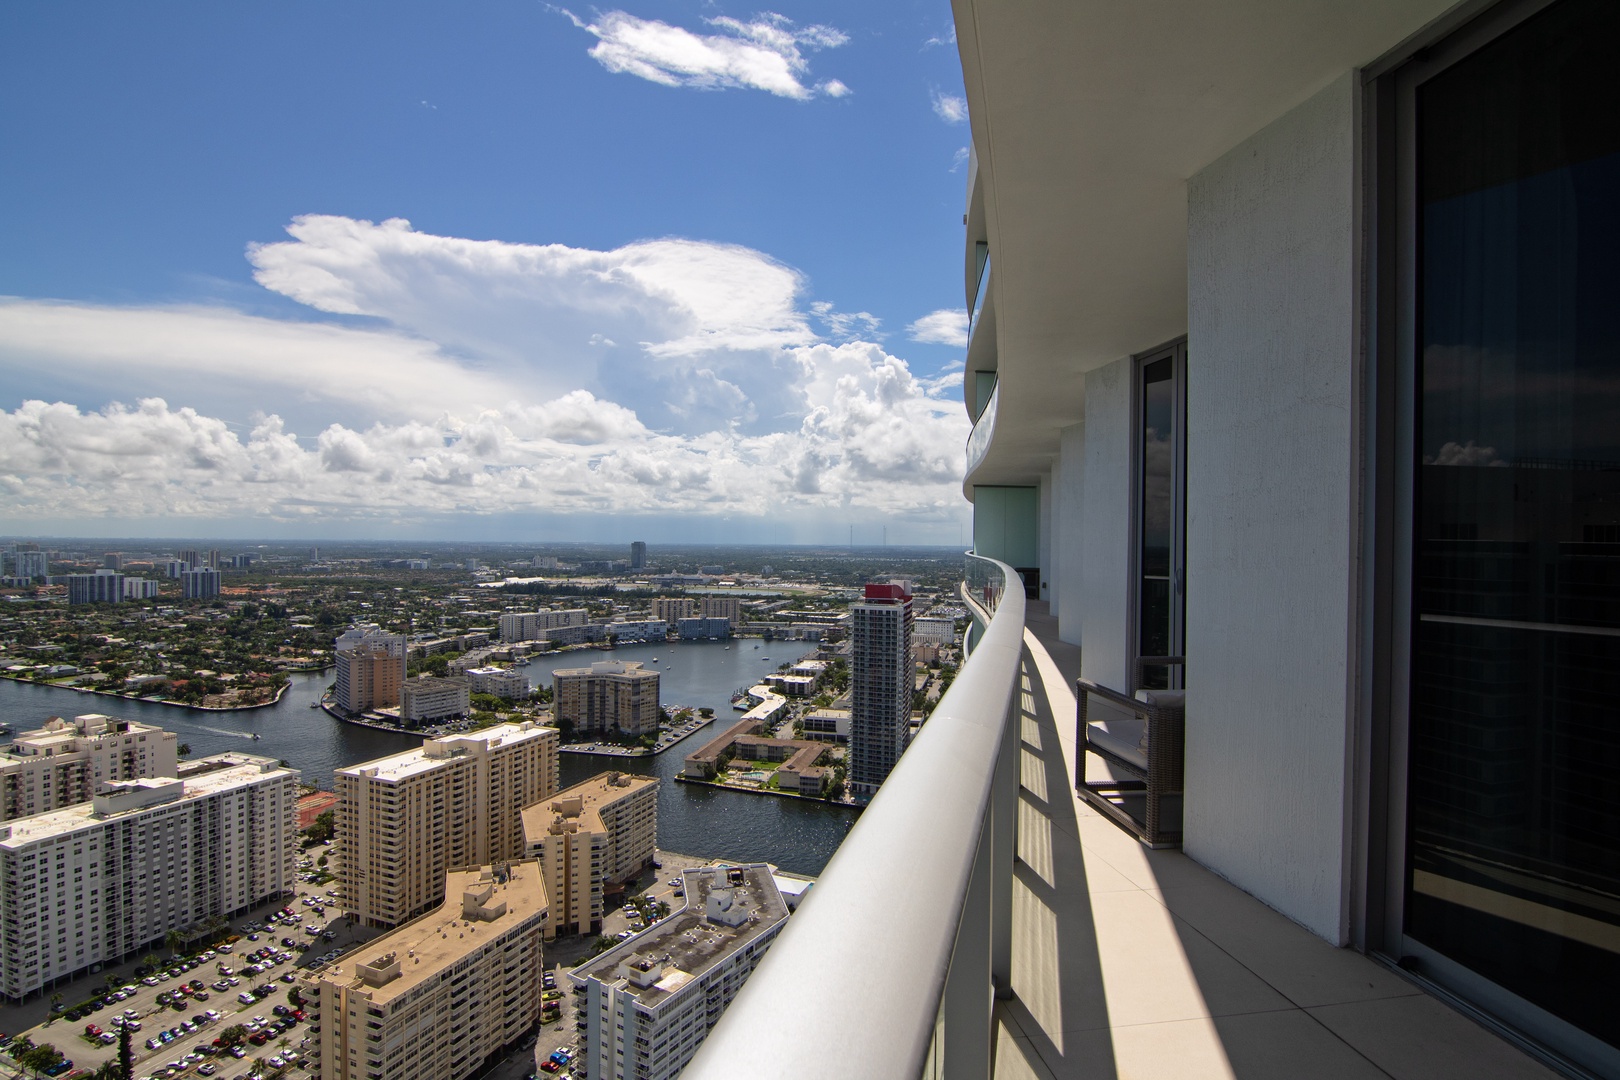 Take in the water & city views from the entire length of the private balcony